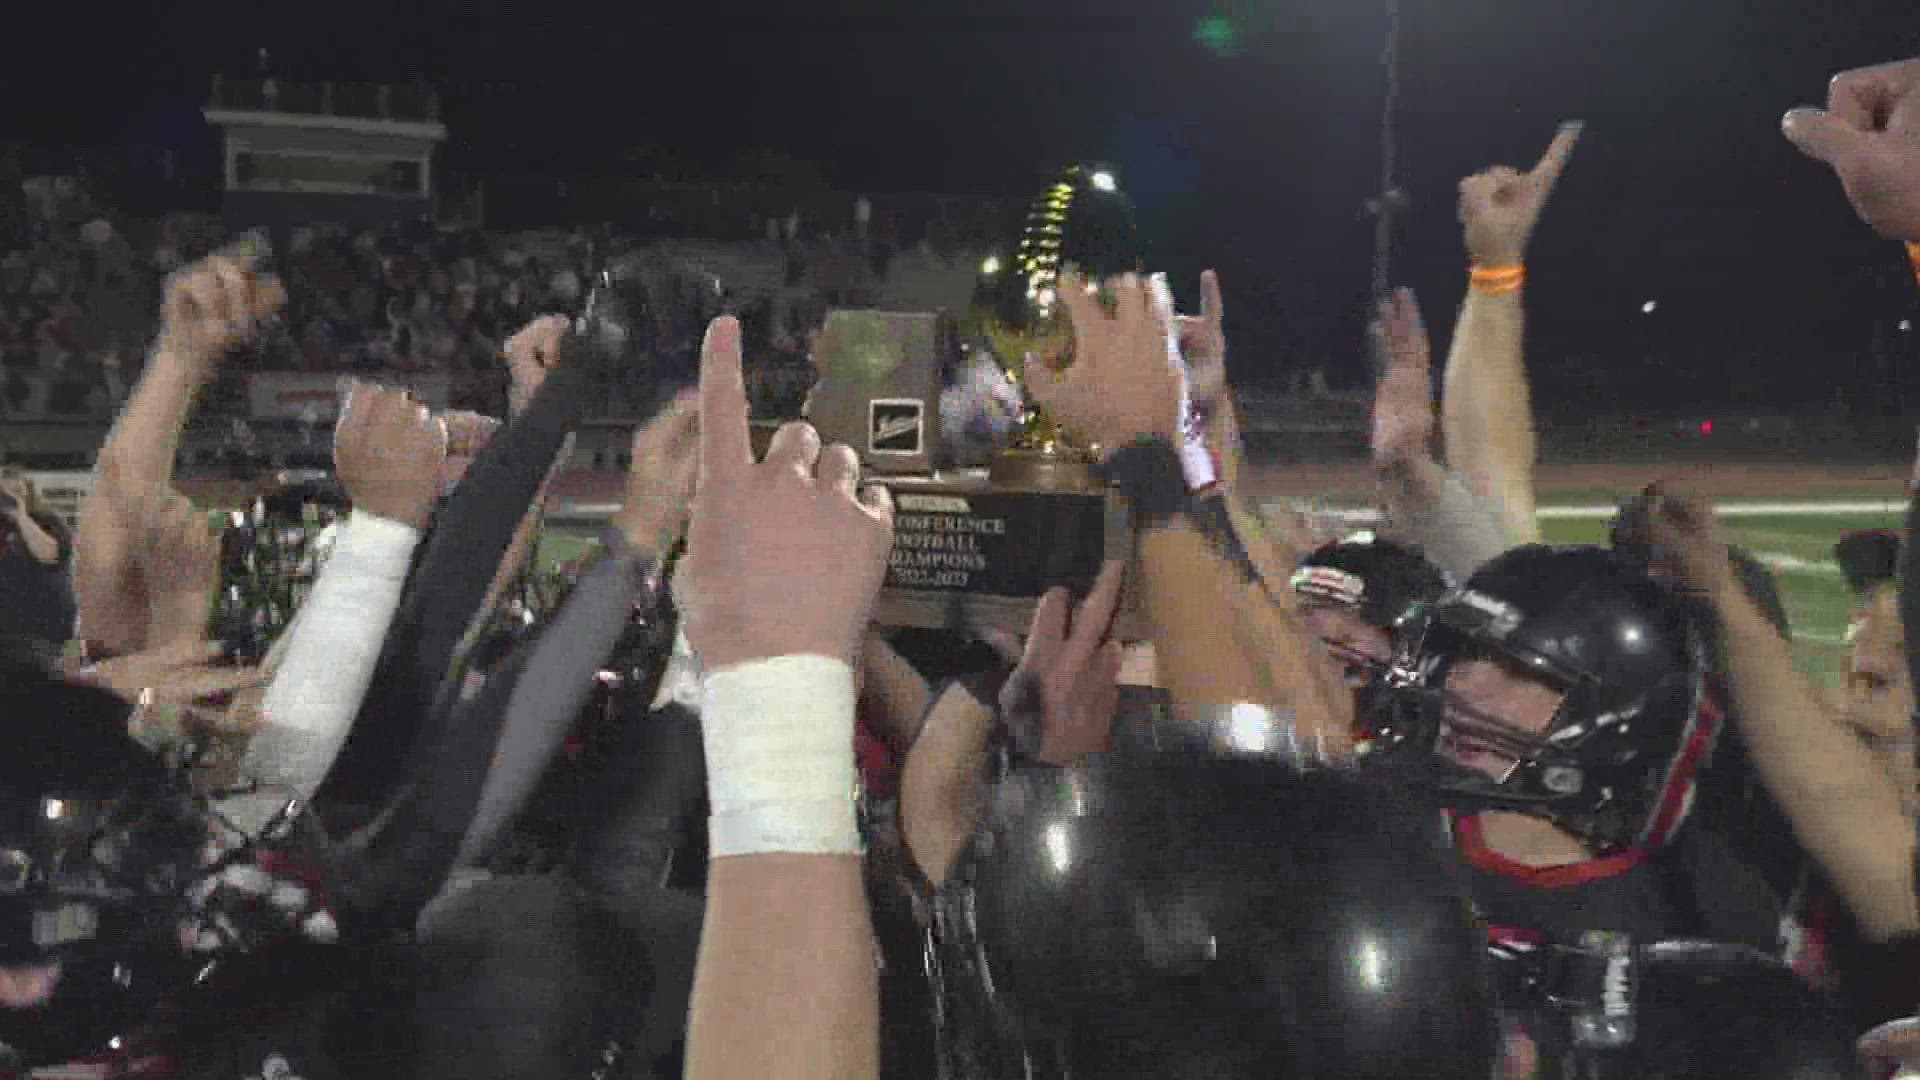 Mogollon won their 3rd straight Class 1A title game over Williams last weekend.